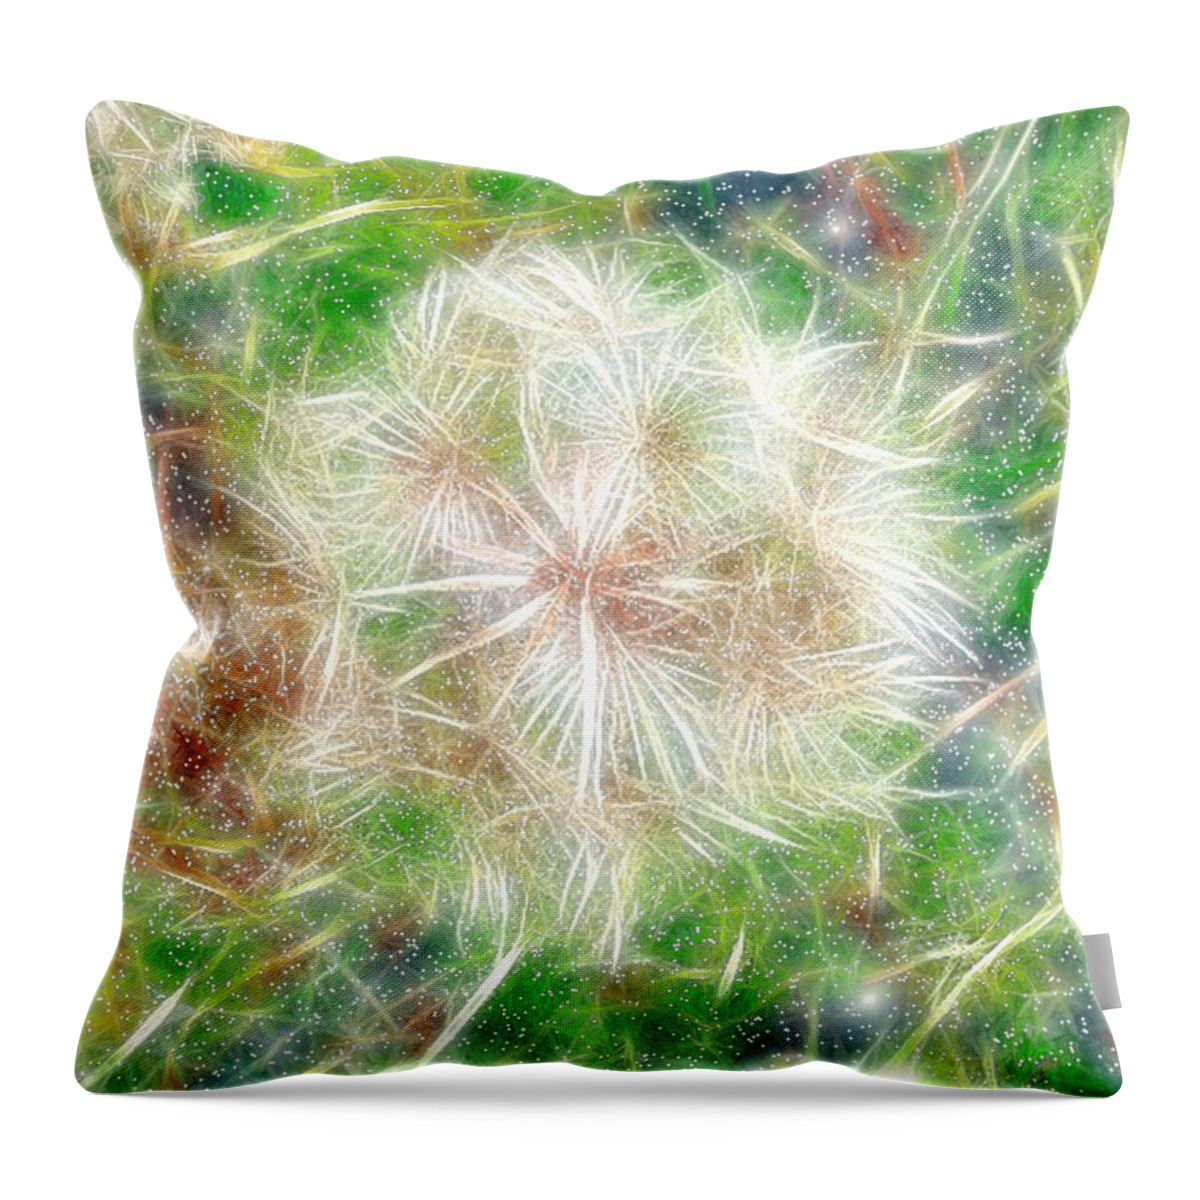 Dandelion Throw Pillow featuring the painting Faerie Fluff by RC DeWinter